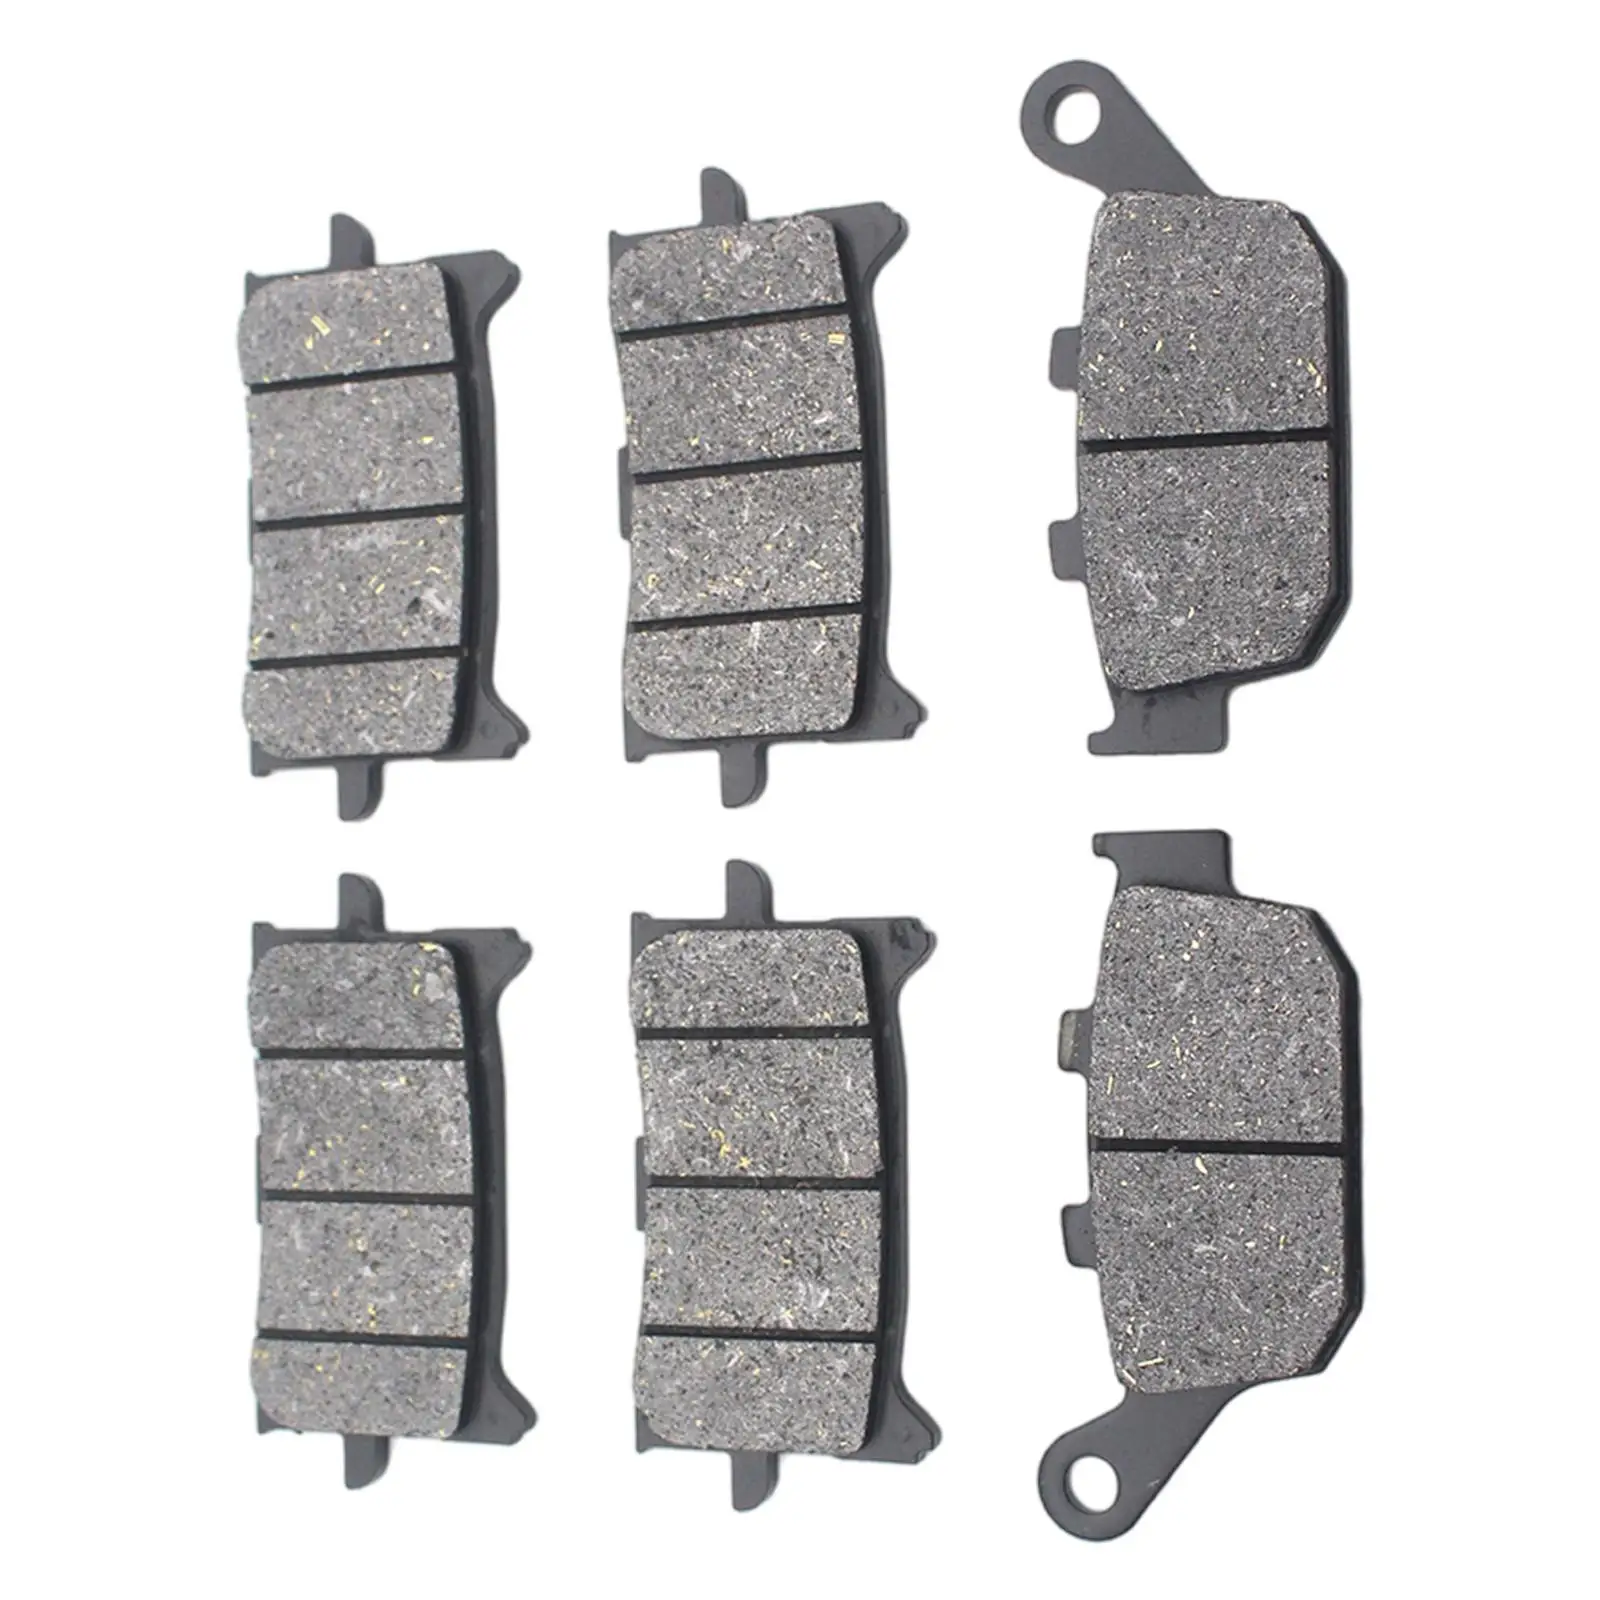 Motorcycle Brake Pads Automotive Brake System Front Rear Fit for